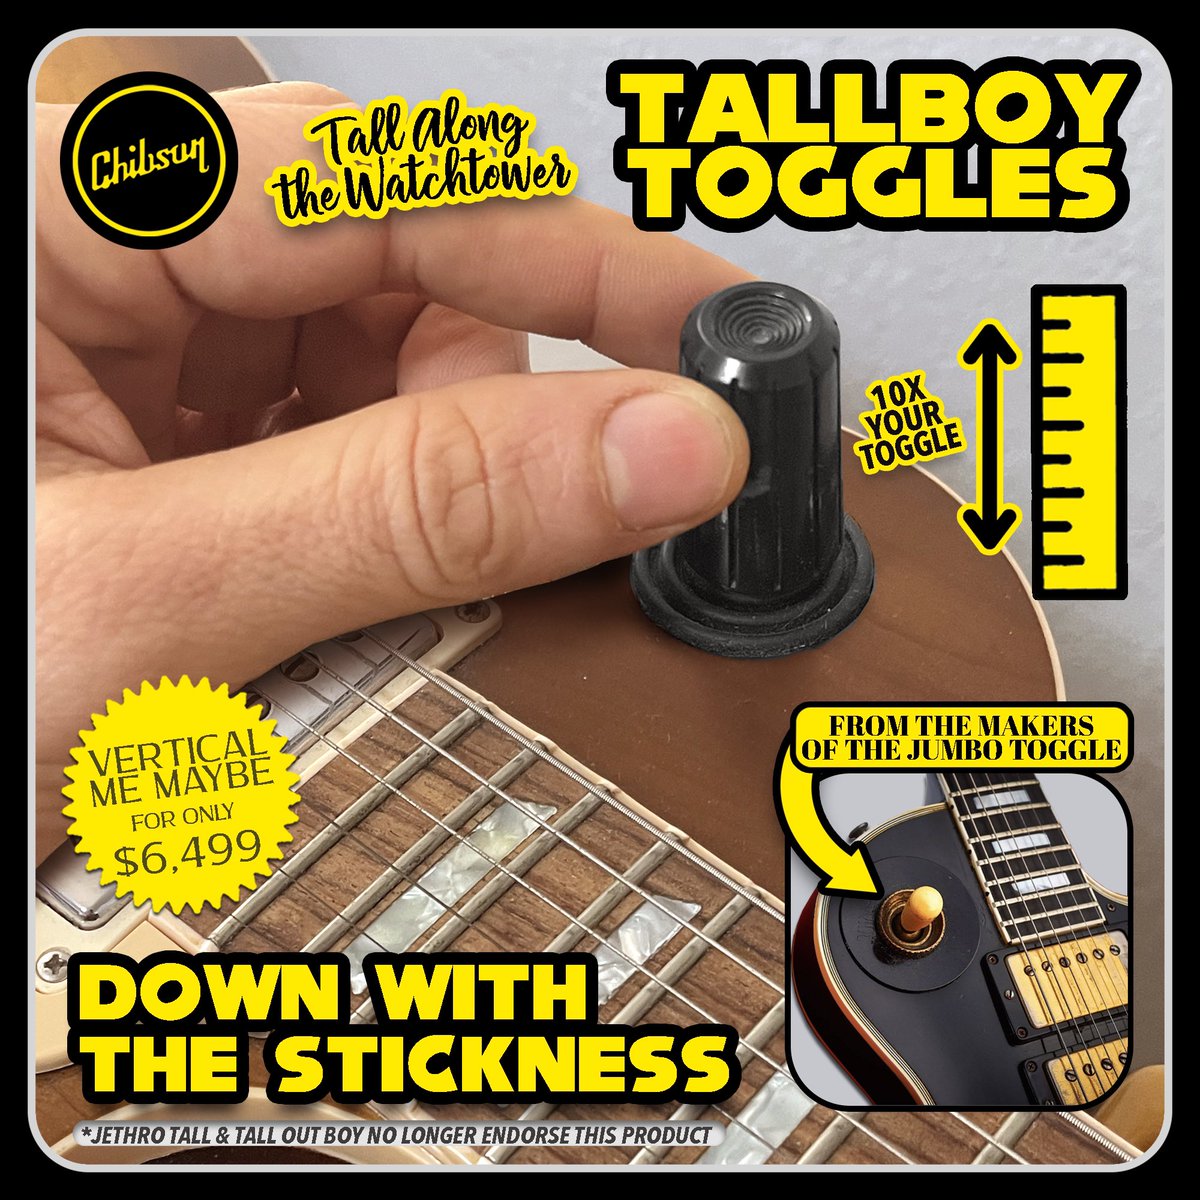 Height For Your Right To Party

#chibson #chib #chibs #chibi #toggle #toggleswitch #guitar #analog #gear #gearybusey #onlyachibsonisgoodenough